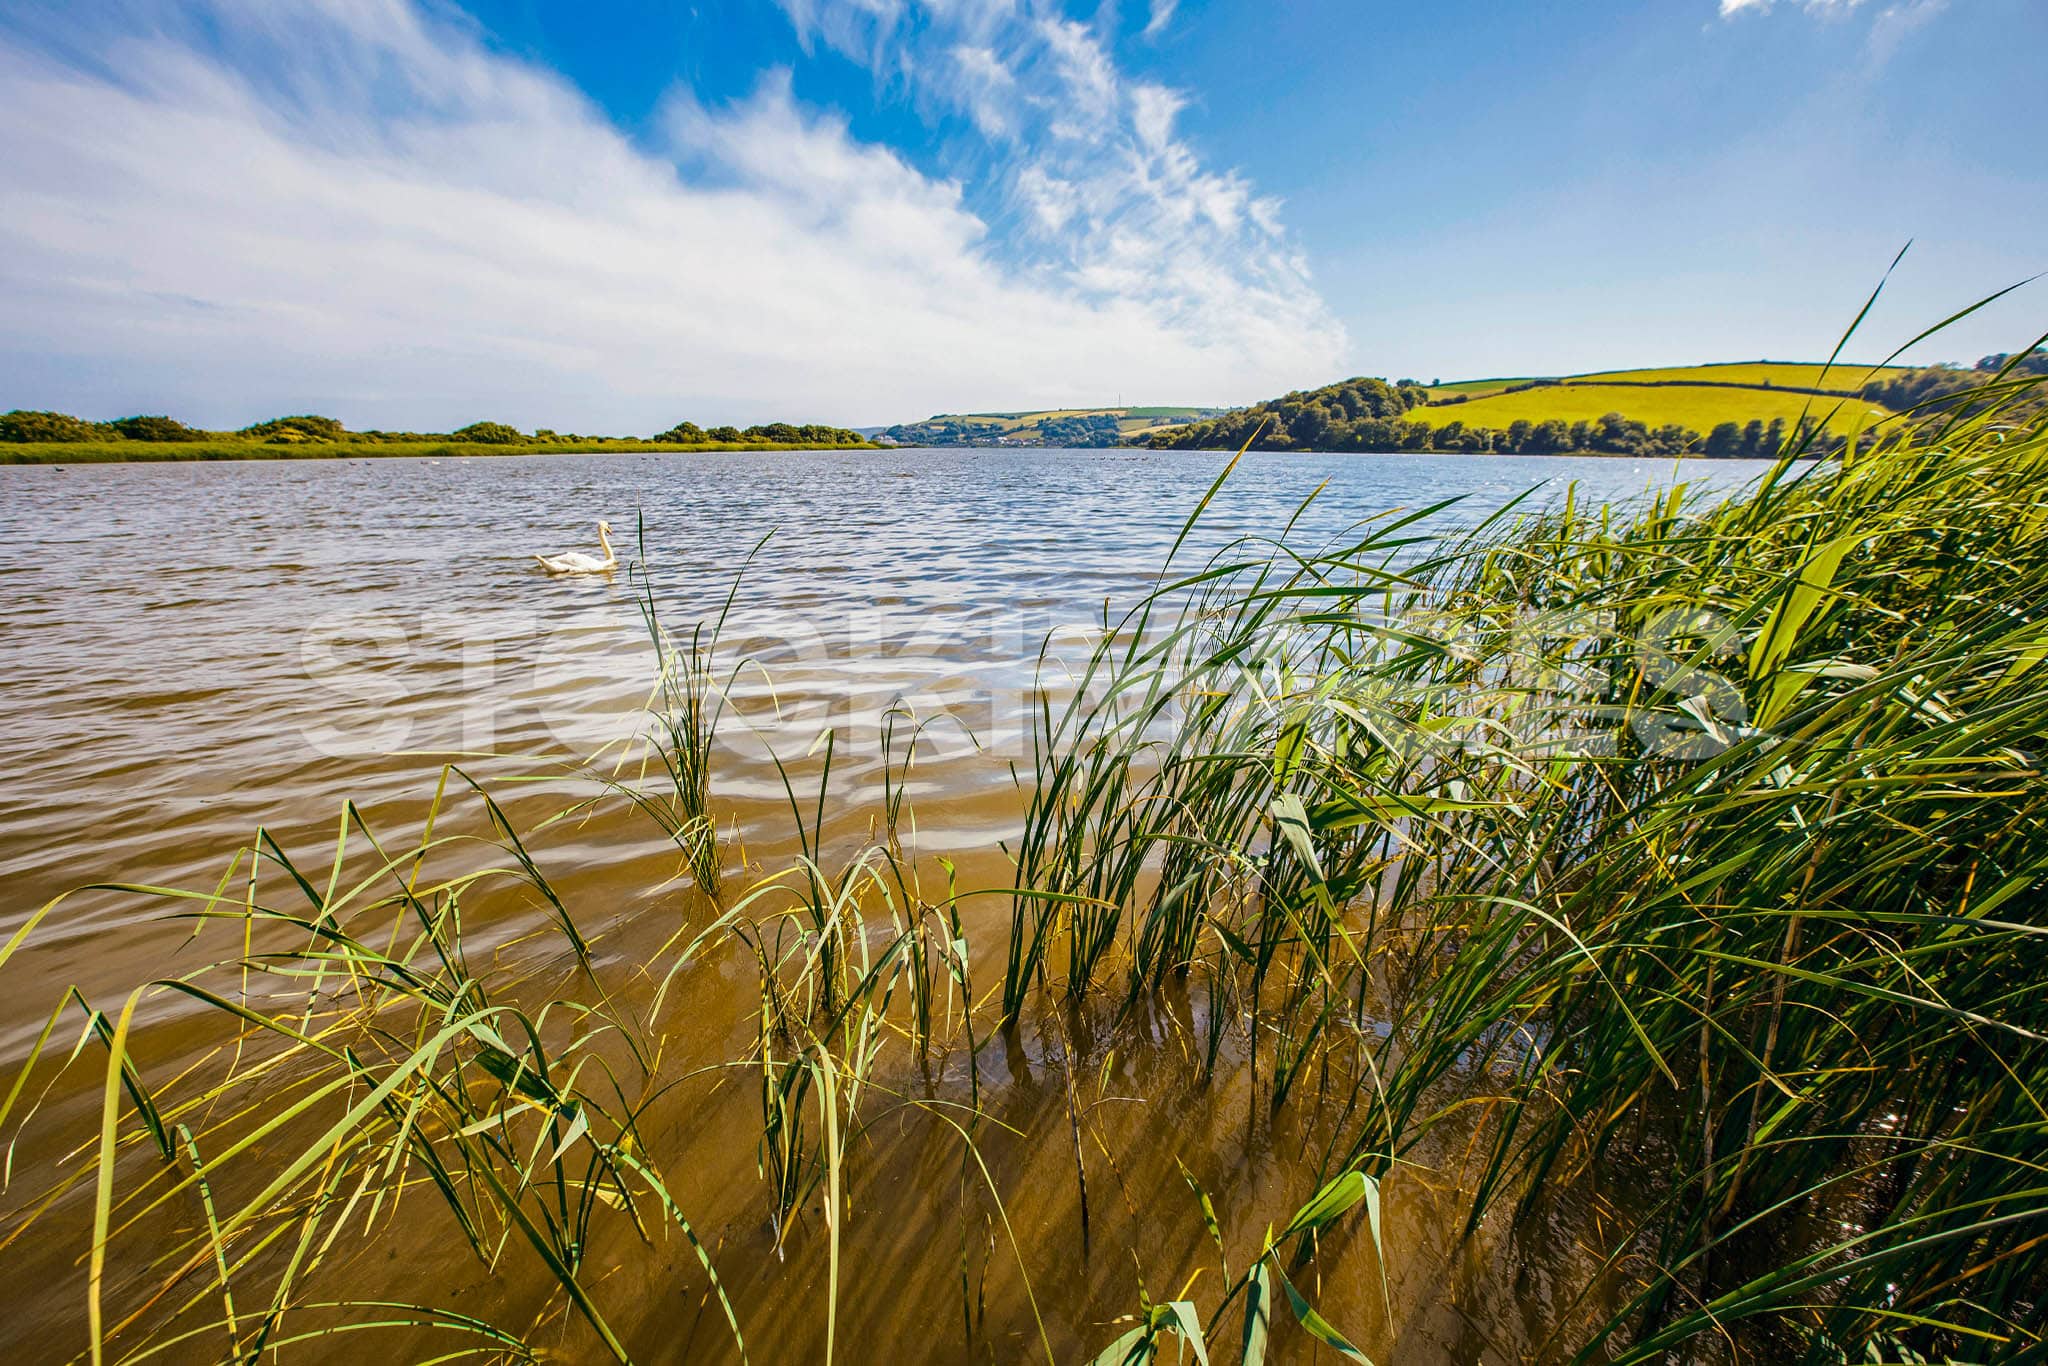 Landscape image of a swim swimming on the Slapton Ley Nature Reserve in the sunshine.